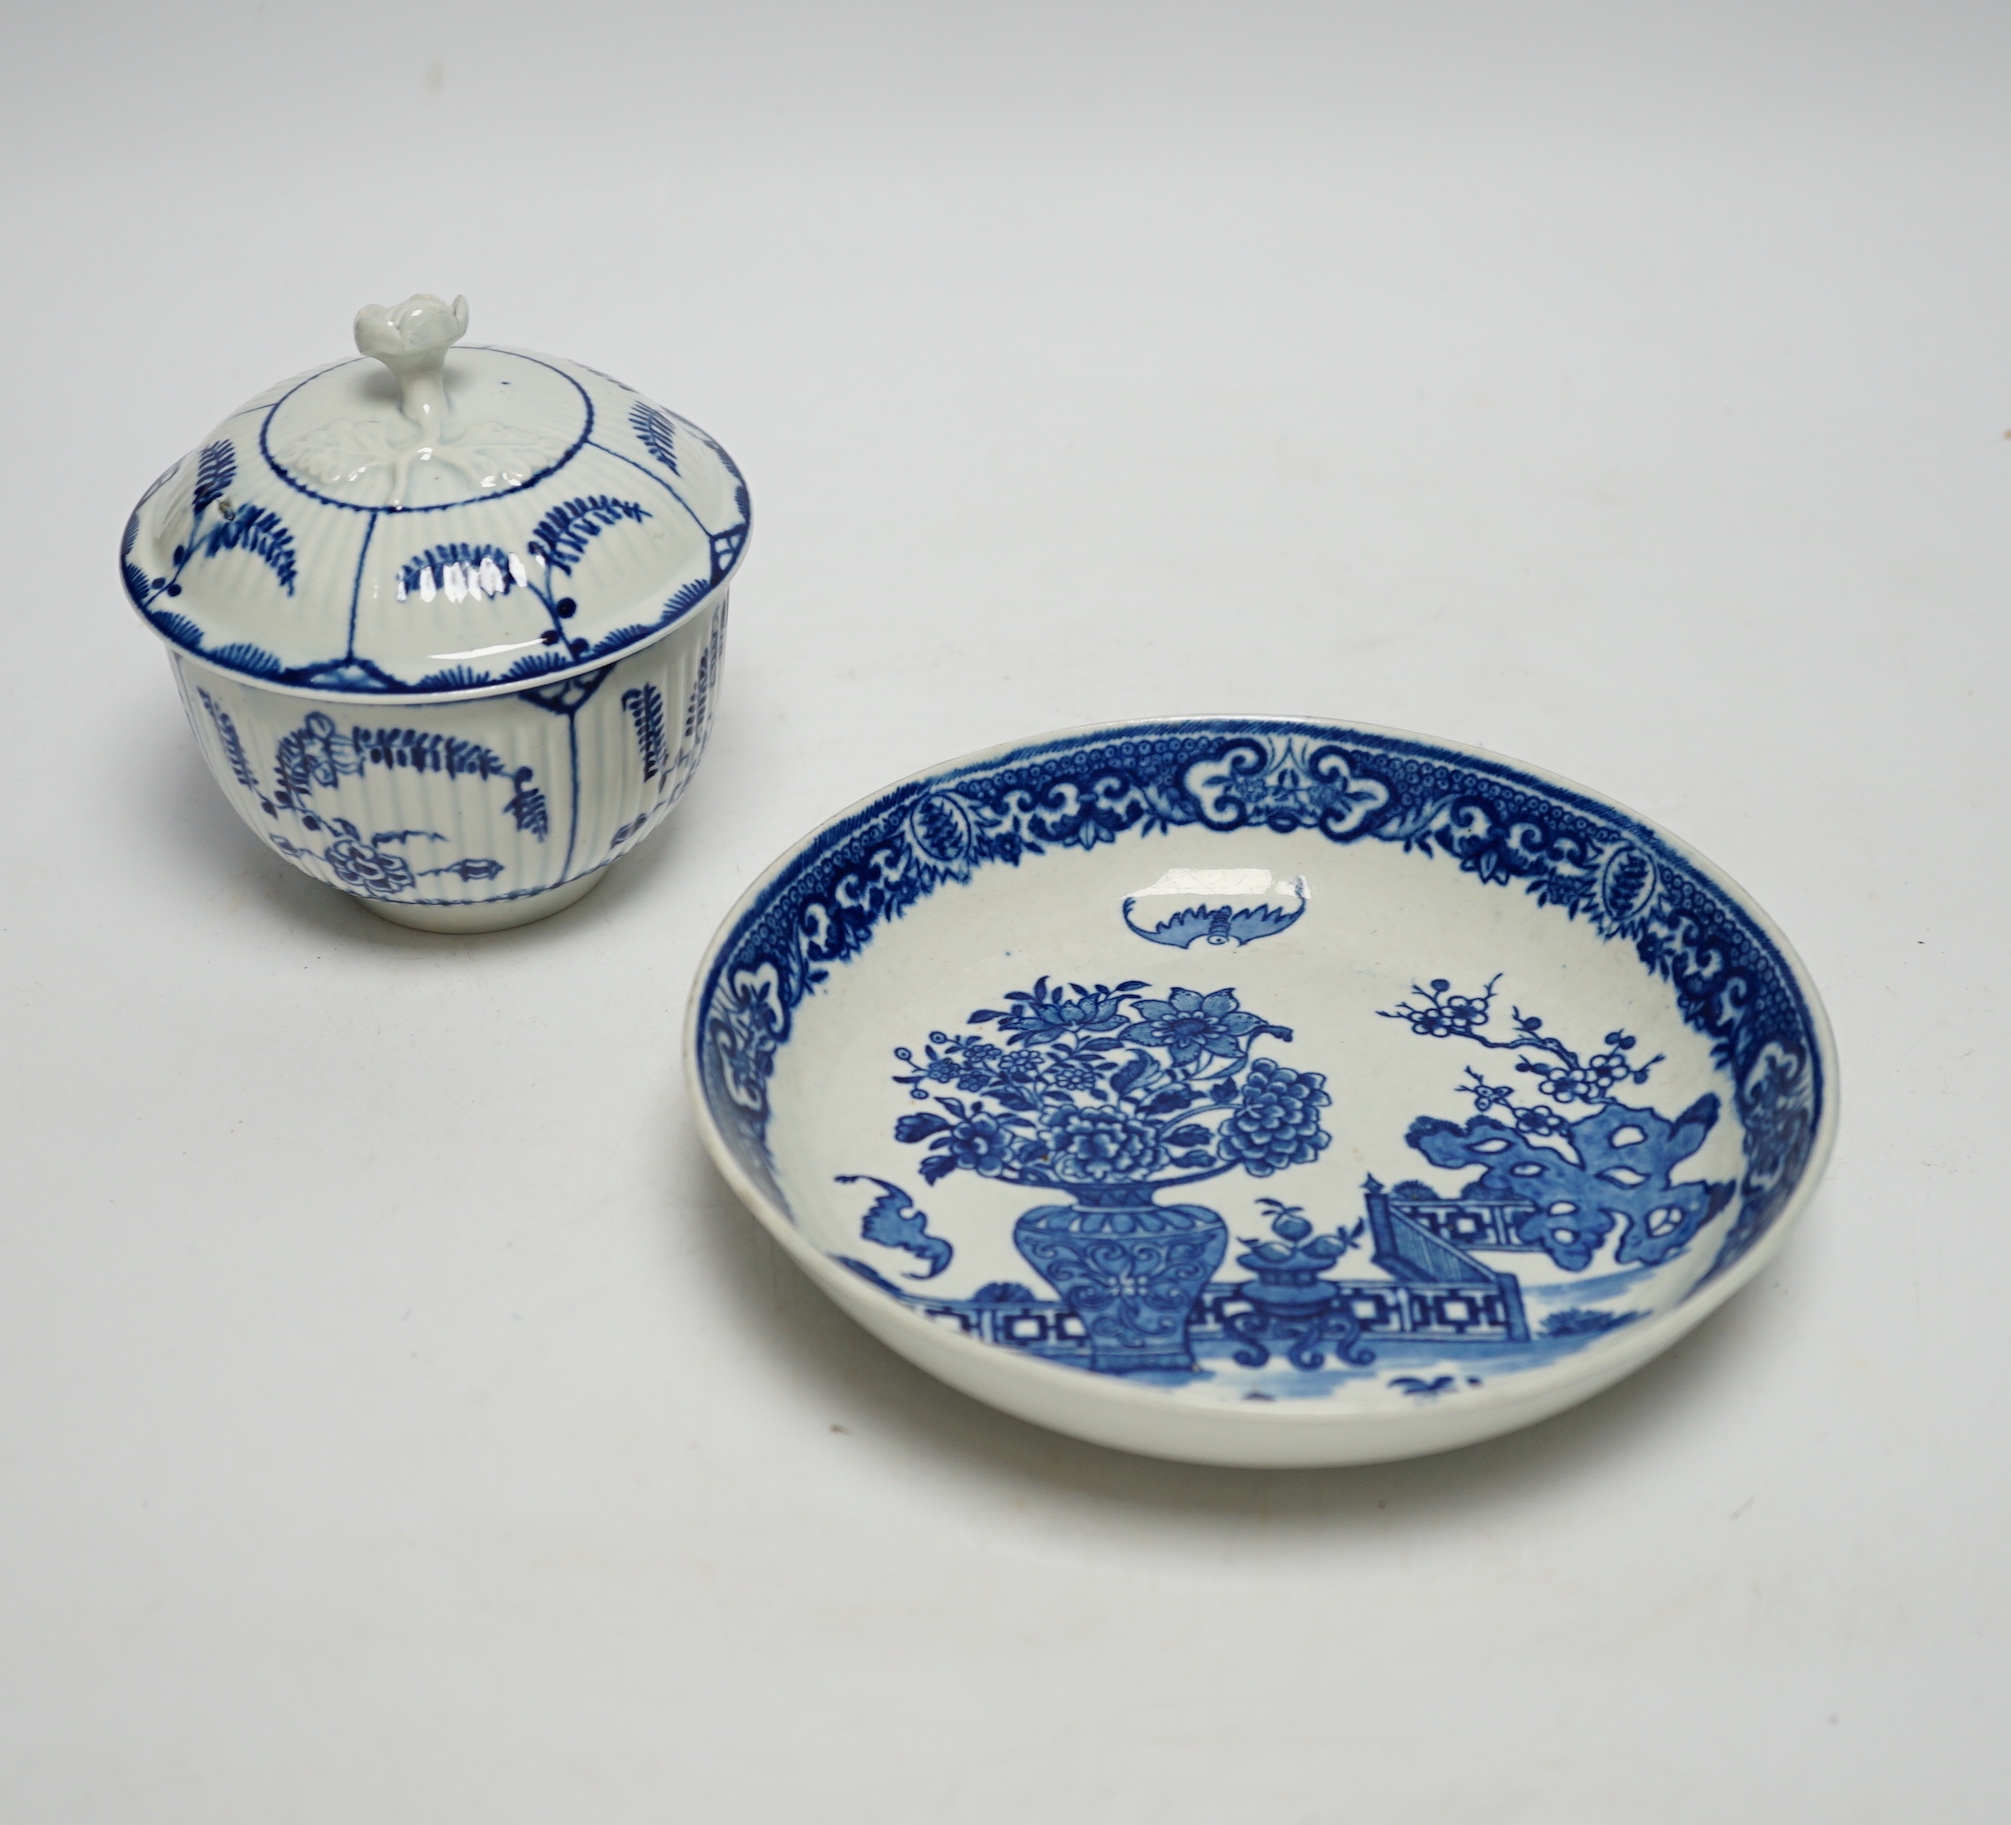 An 18th century Worcester Immortelle pattern sugar bowl and cover and a bat saucer dish, saucer dish 16cm diameter